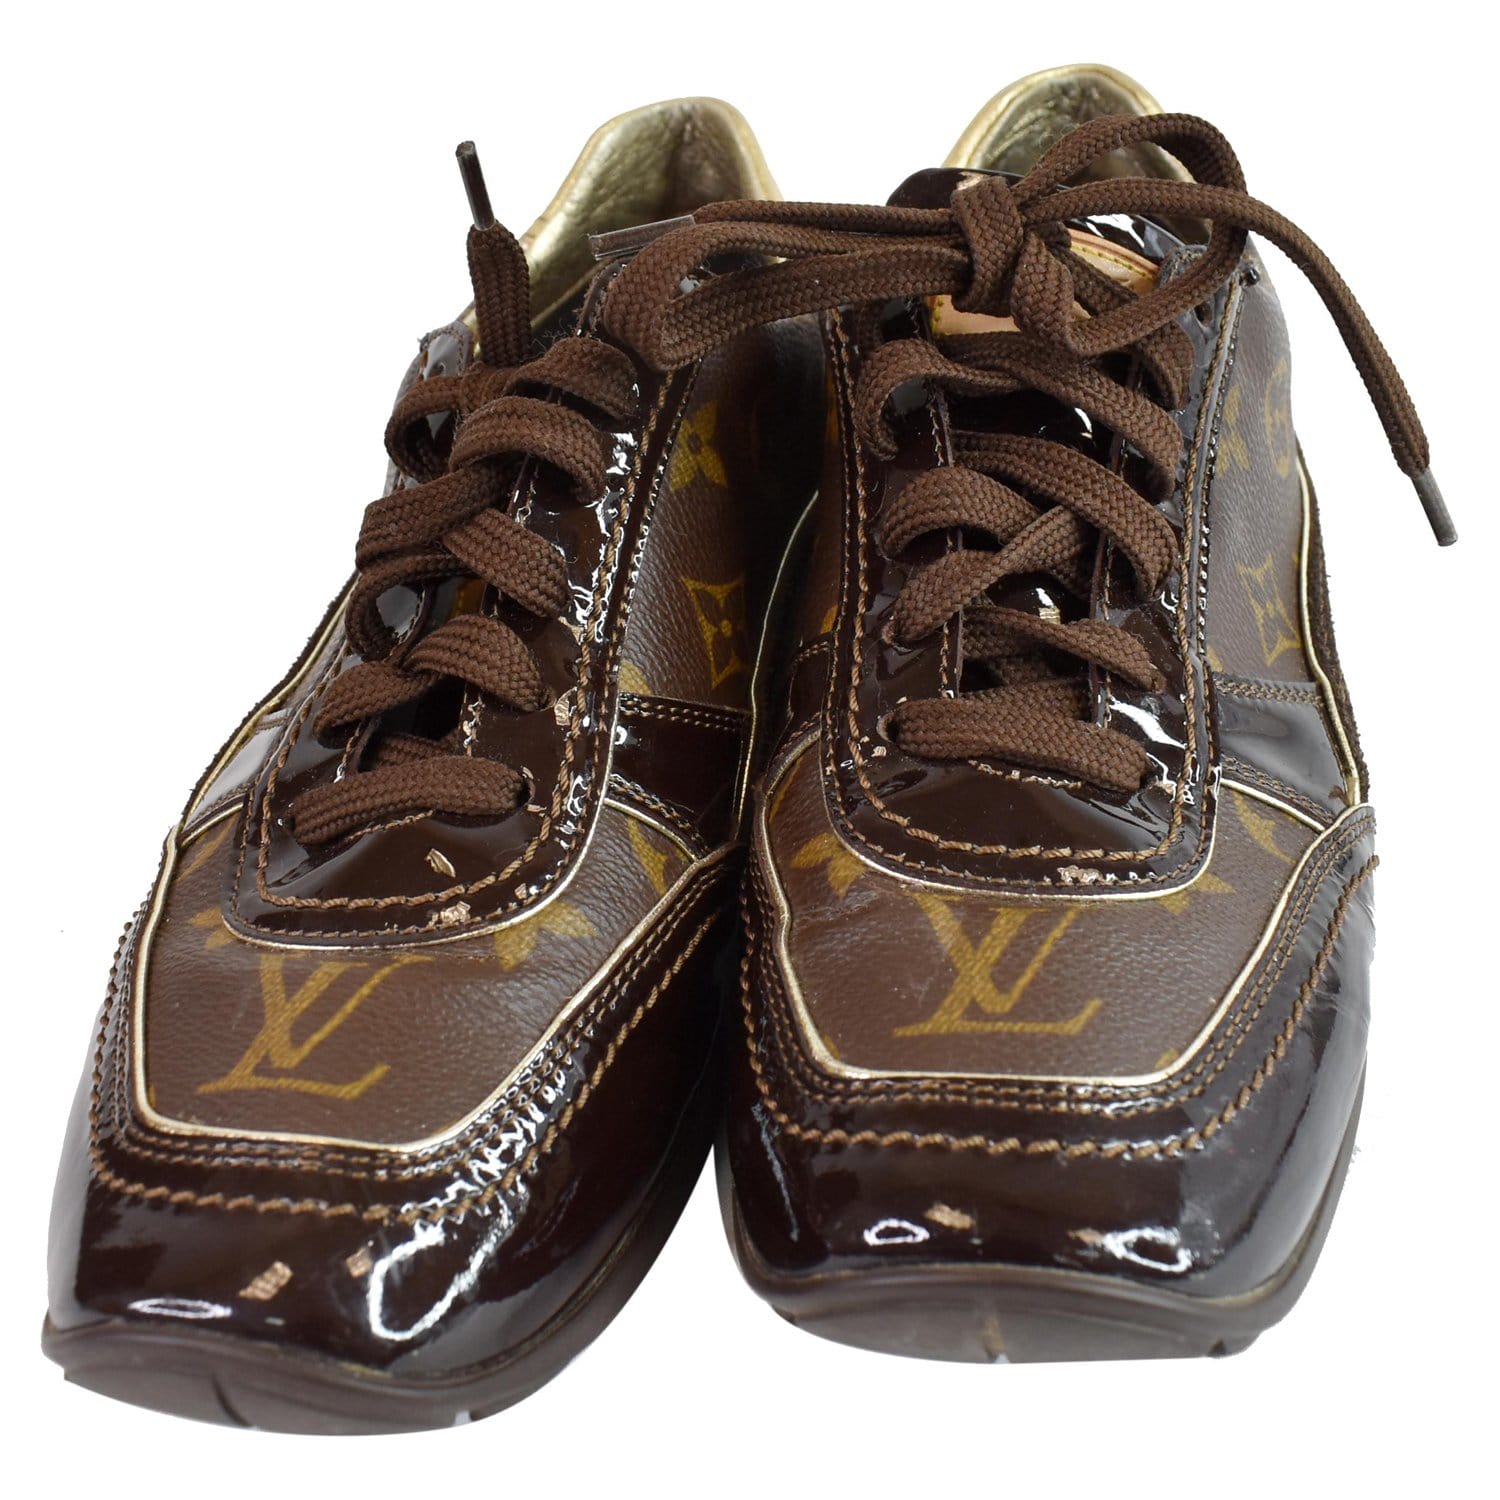 Louis Vuitton Monogram Canvas and Suede Globe Trotter Sneakers Size 4.5/35